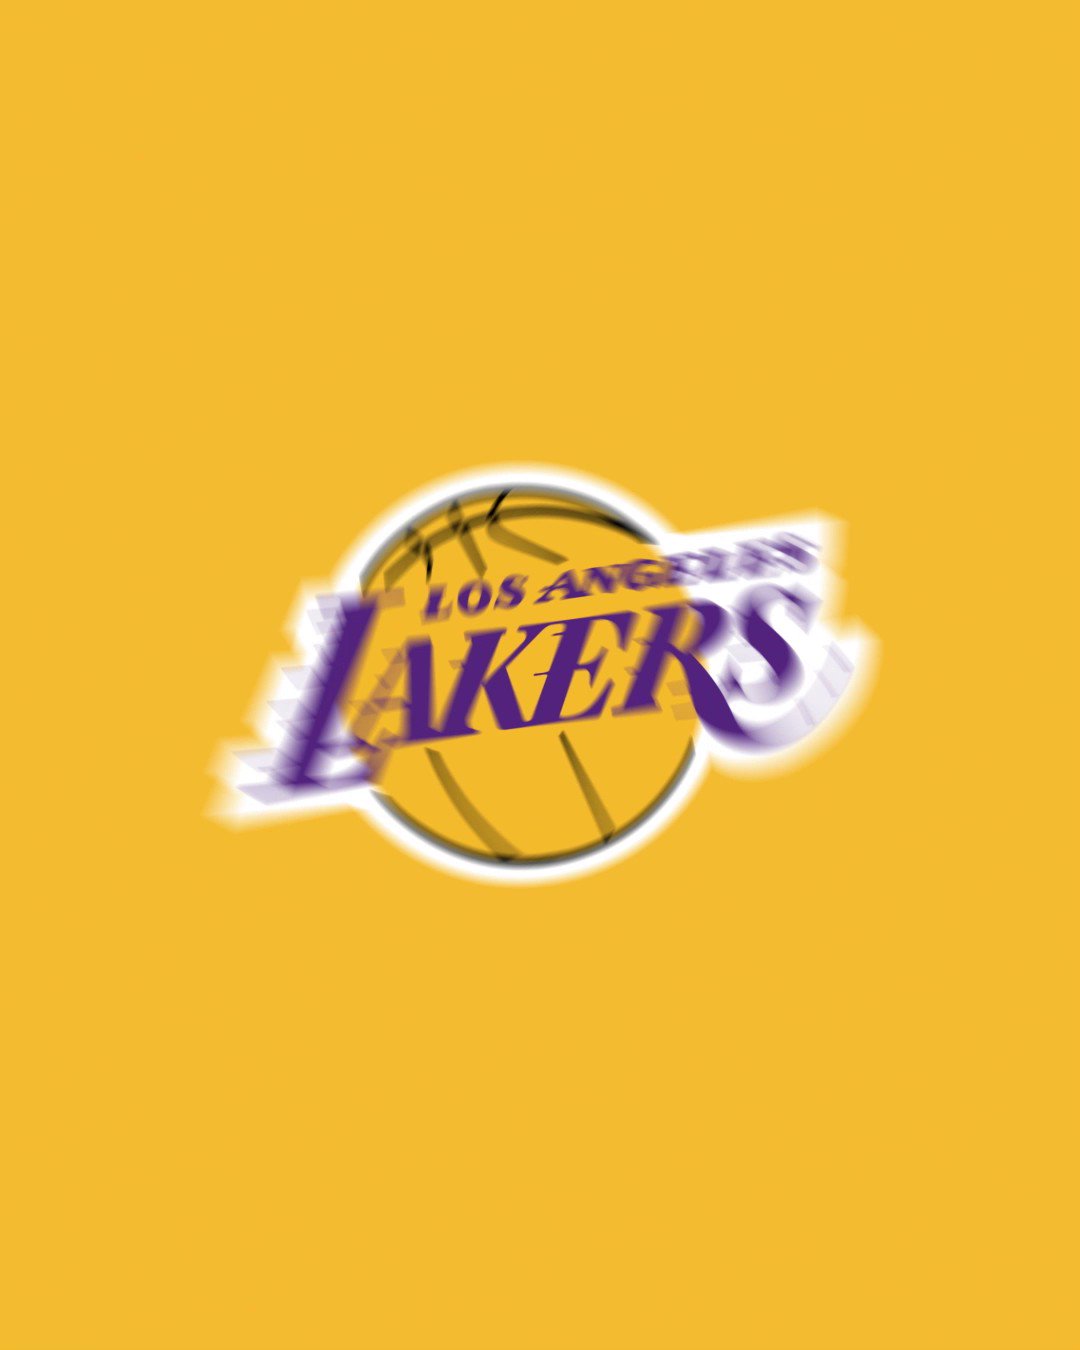 Los Angeles Lakers iPhone Wallpapers - Wallpaper Cave